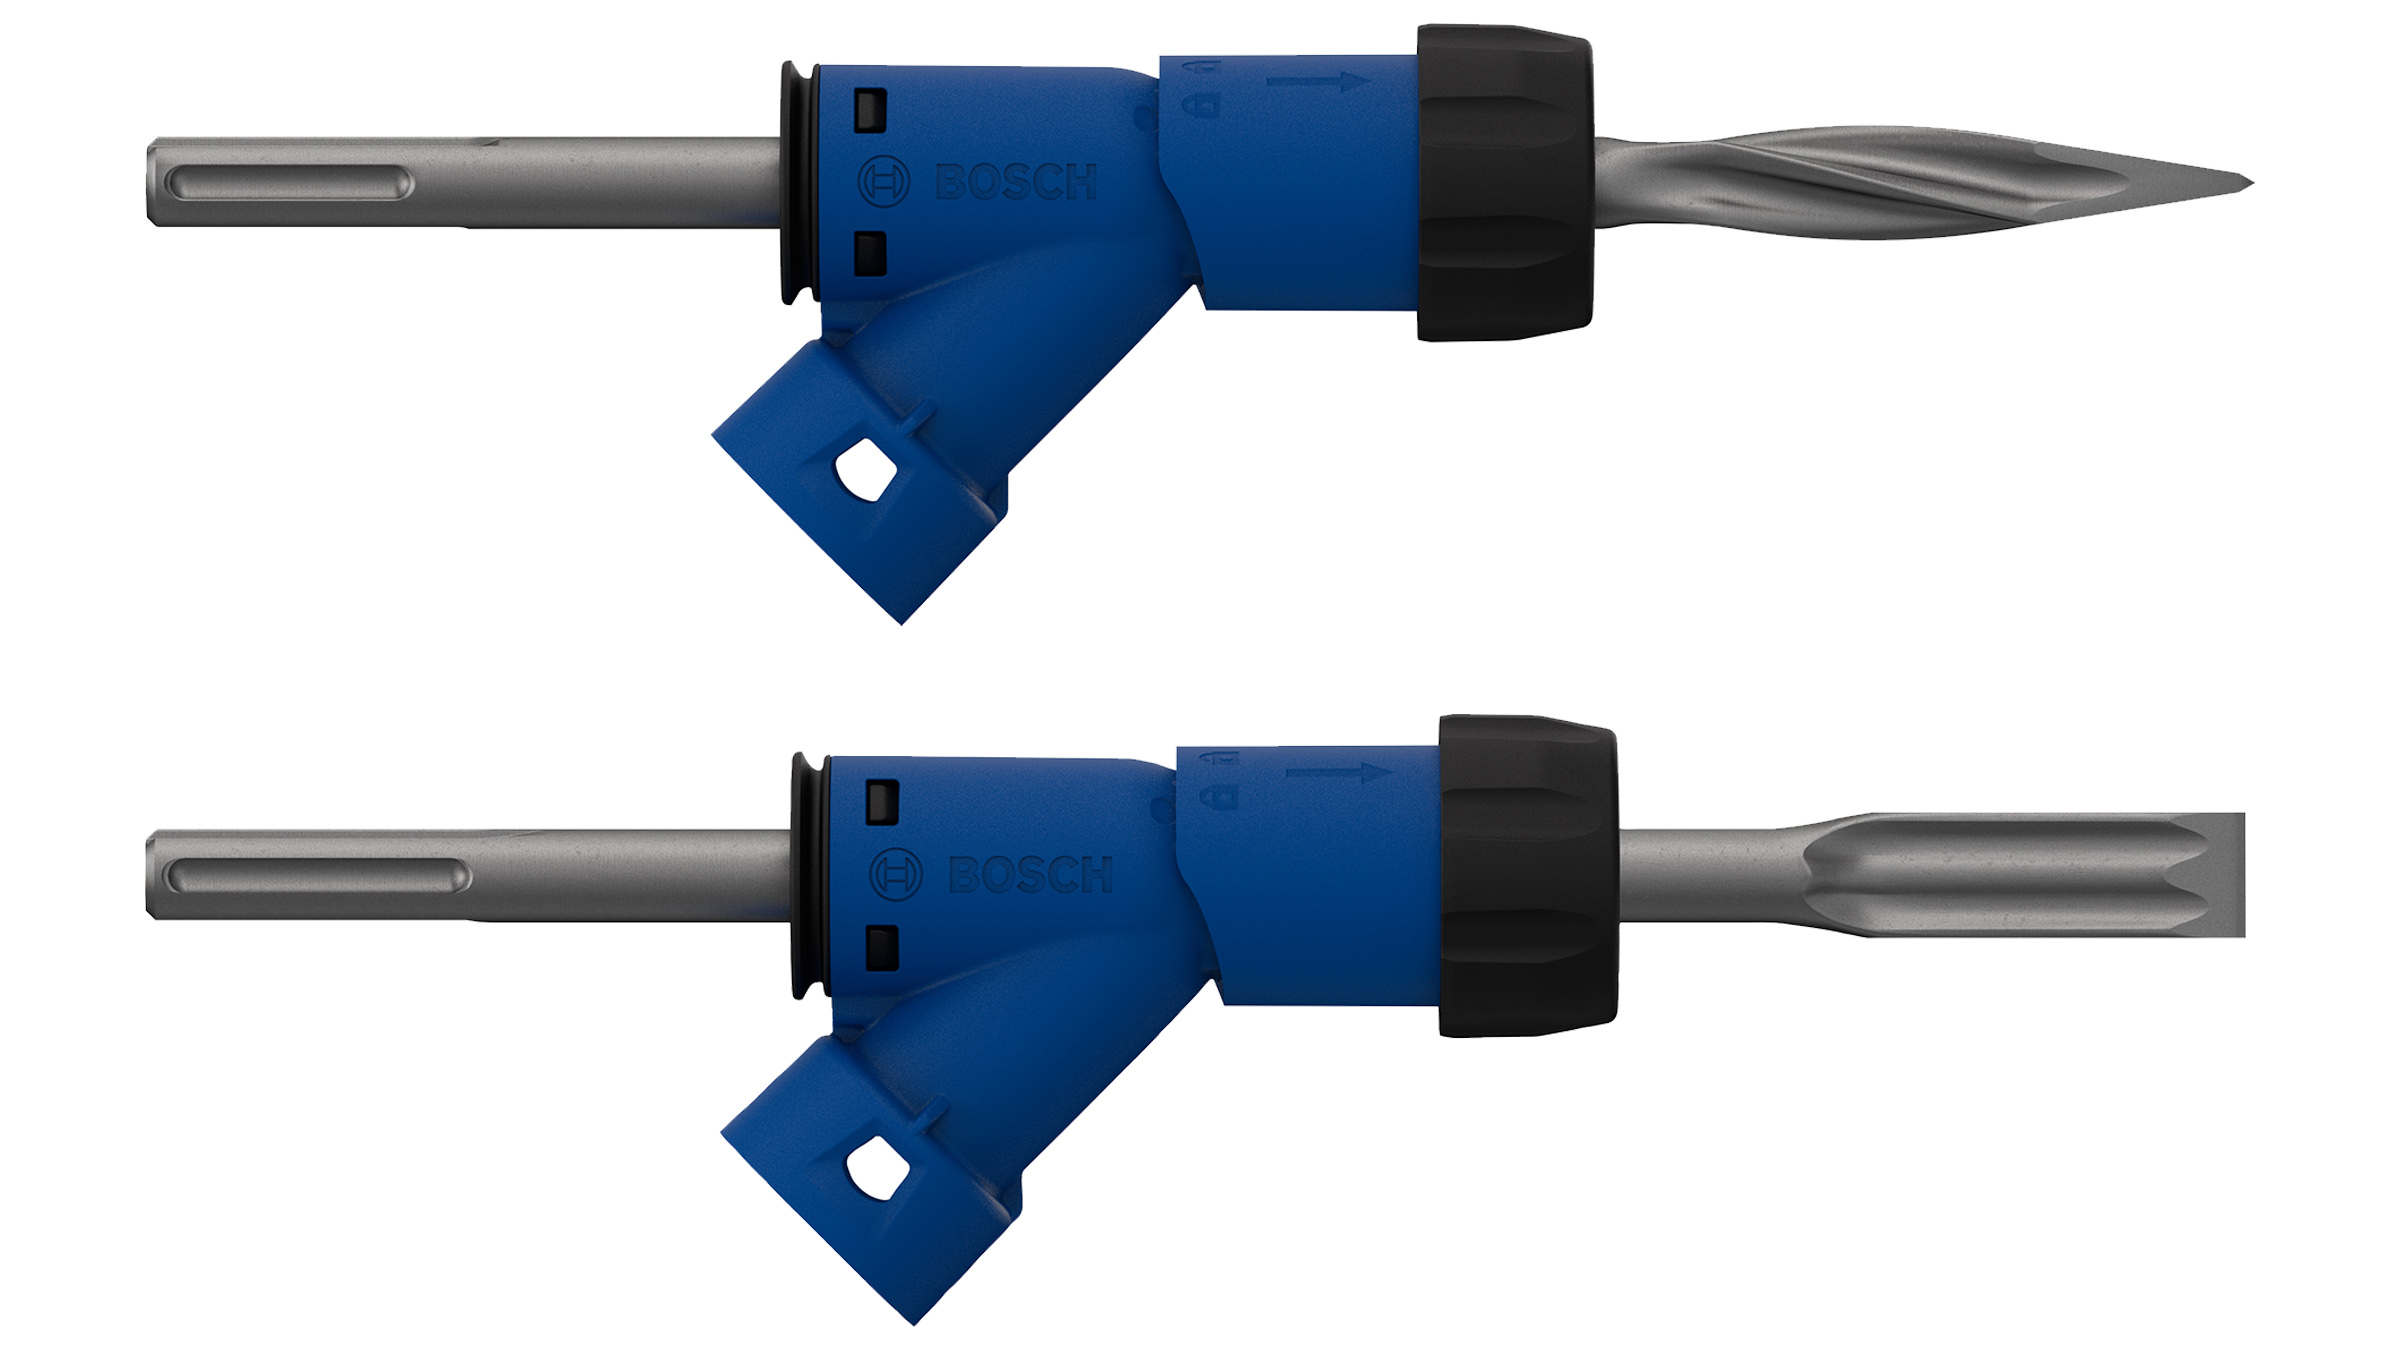 Low-dust chiseling thanks to adapter: Expert SDS Clean Set for RTec pointed or flat chisels